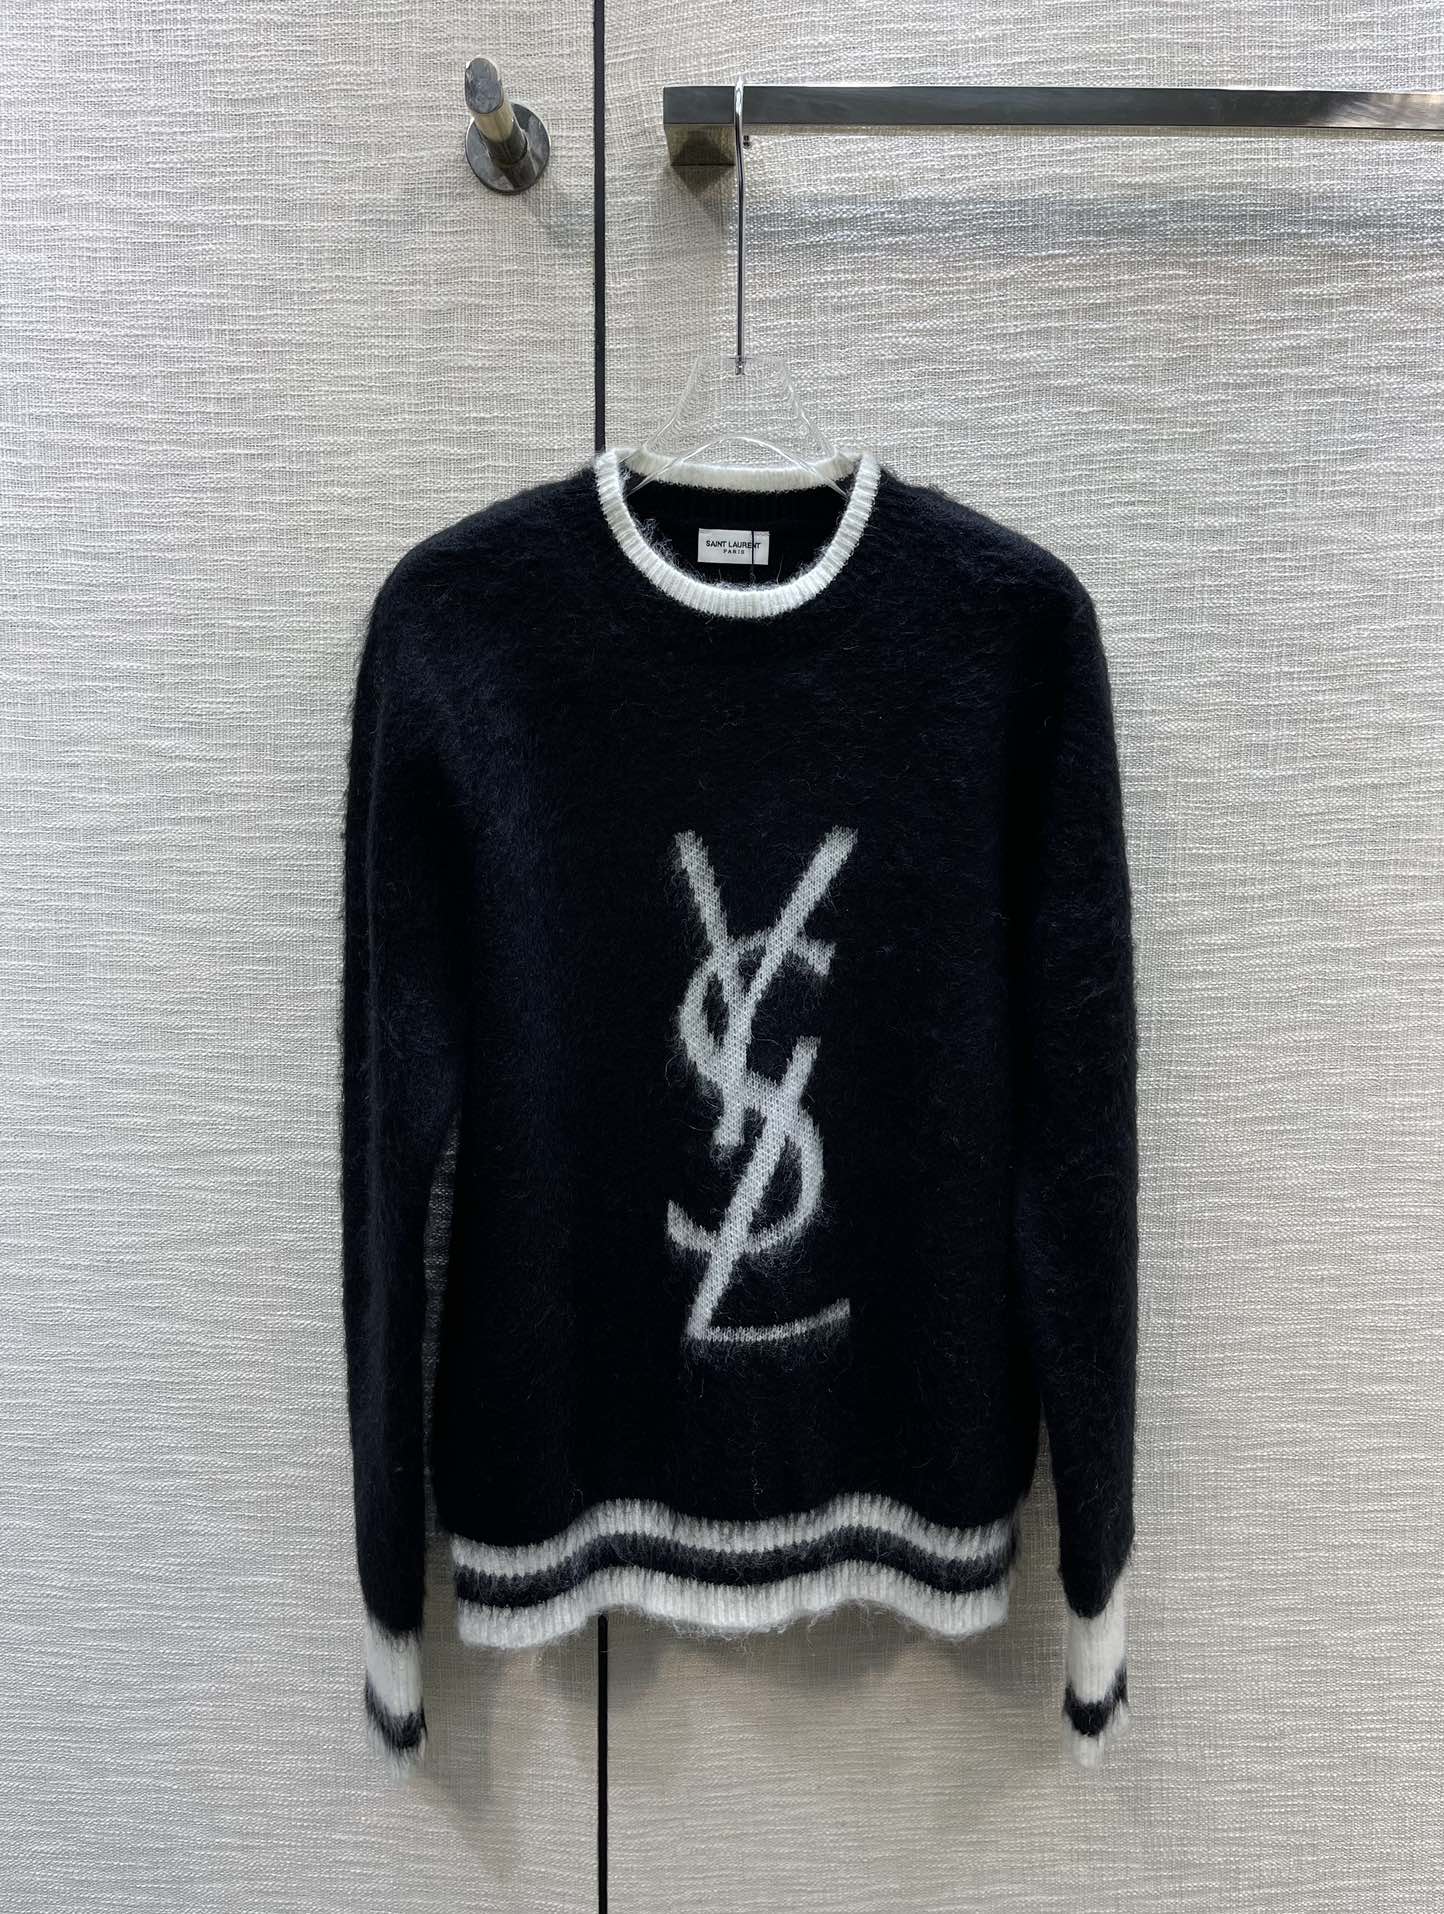 Yves Saint Laurent mirror quality Clothing Knit Sweater Shirts & Blouses Knitting Fall/Winter Collection